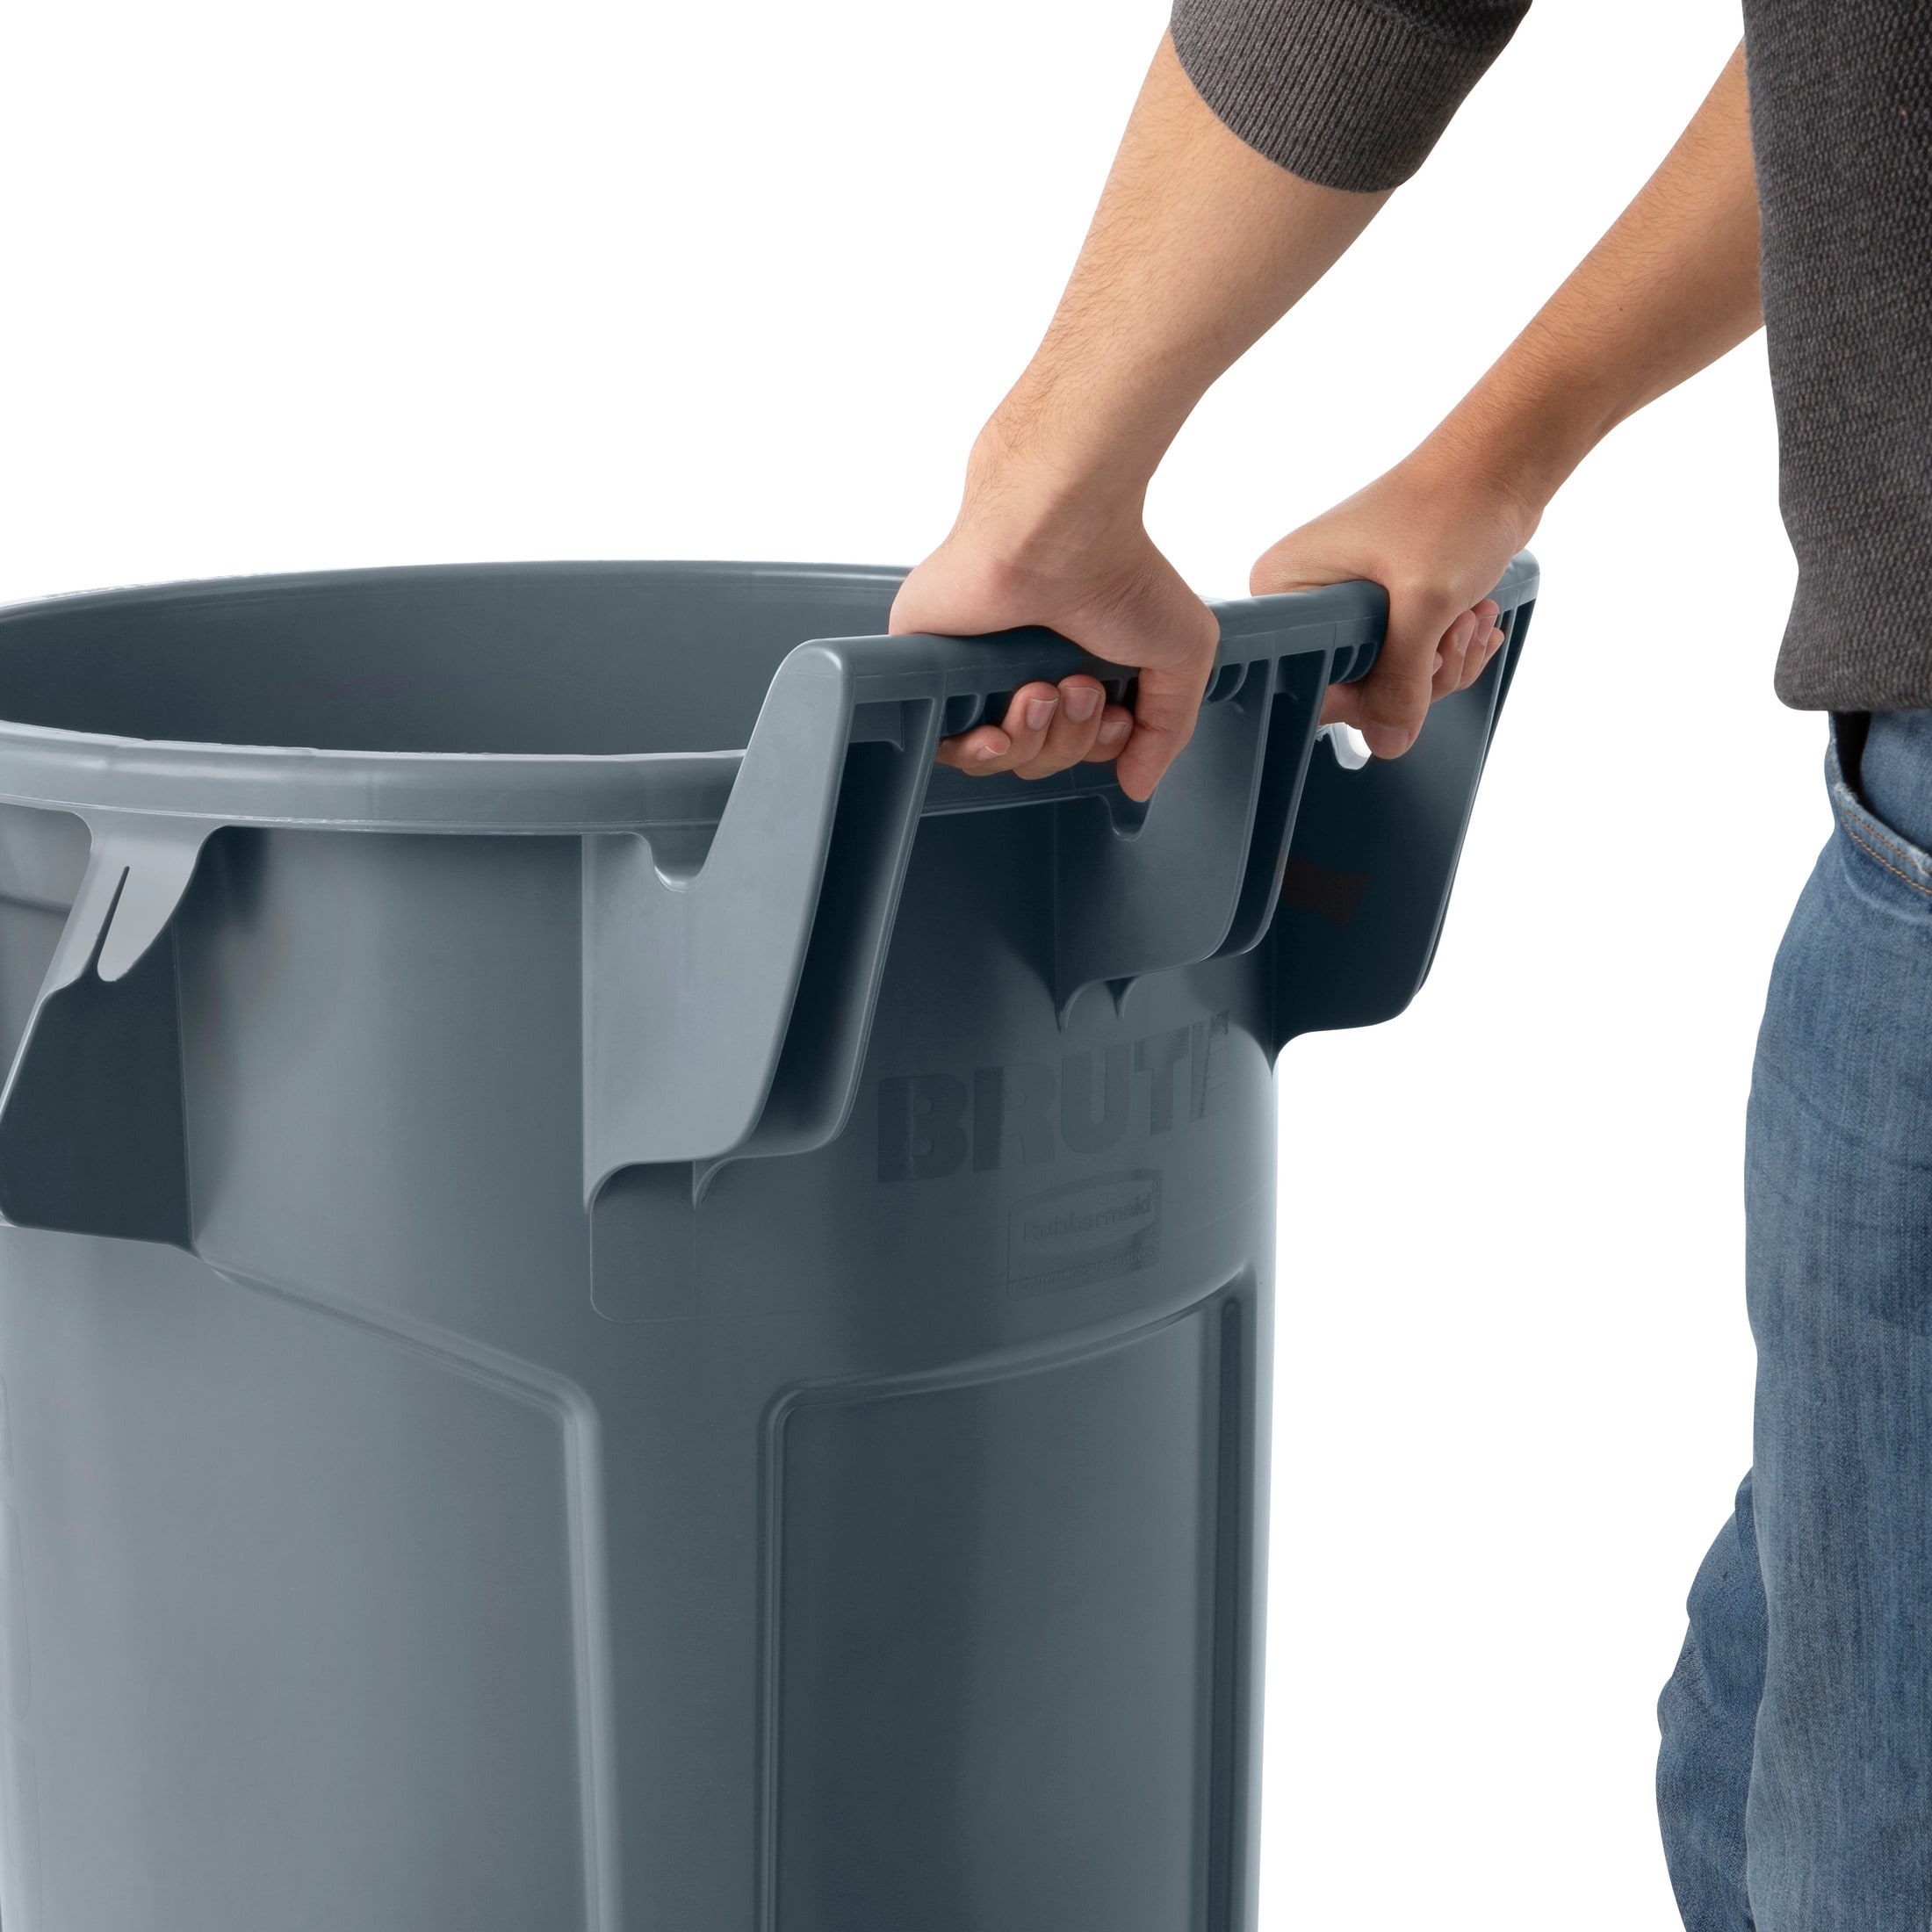 Gray Rubbermaid Brute Large 44-Gallon Plastic Garbage Can - Ace